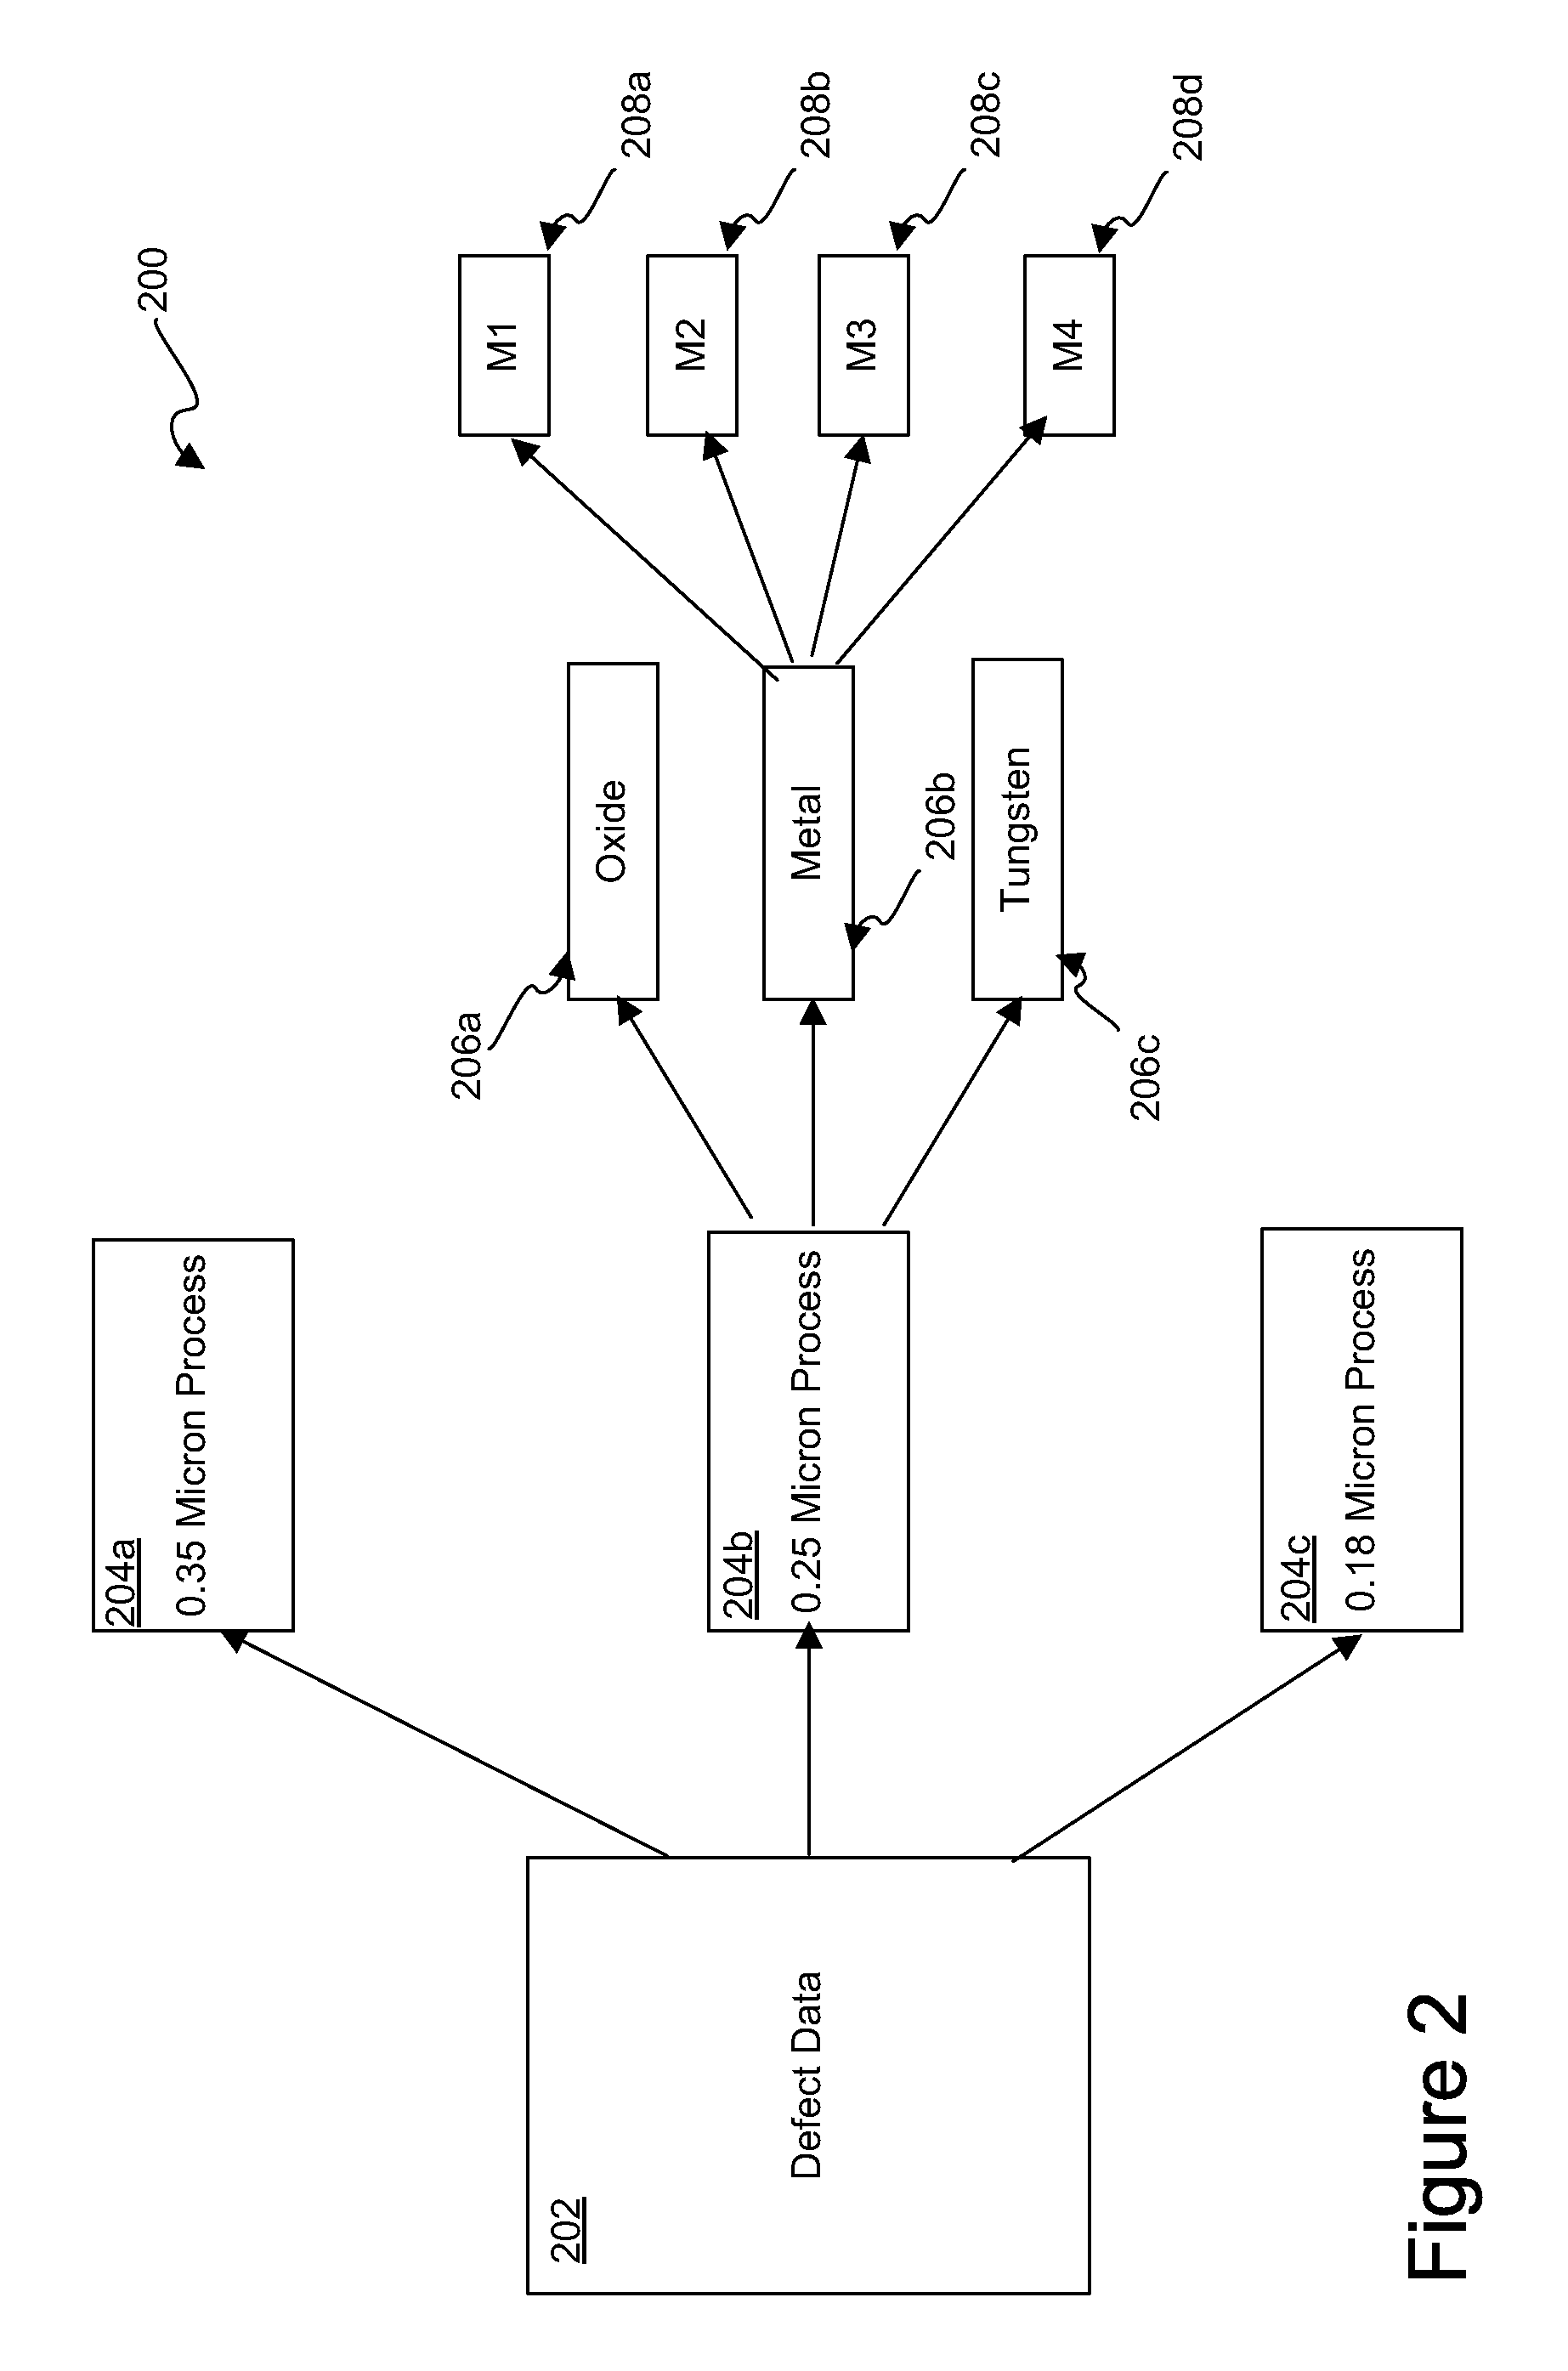 Apparatus and methods for searching through and analyzing defect images and wafer maps